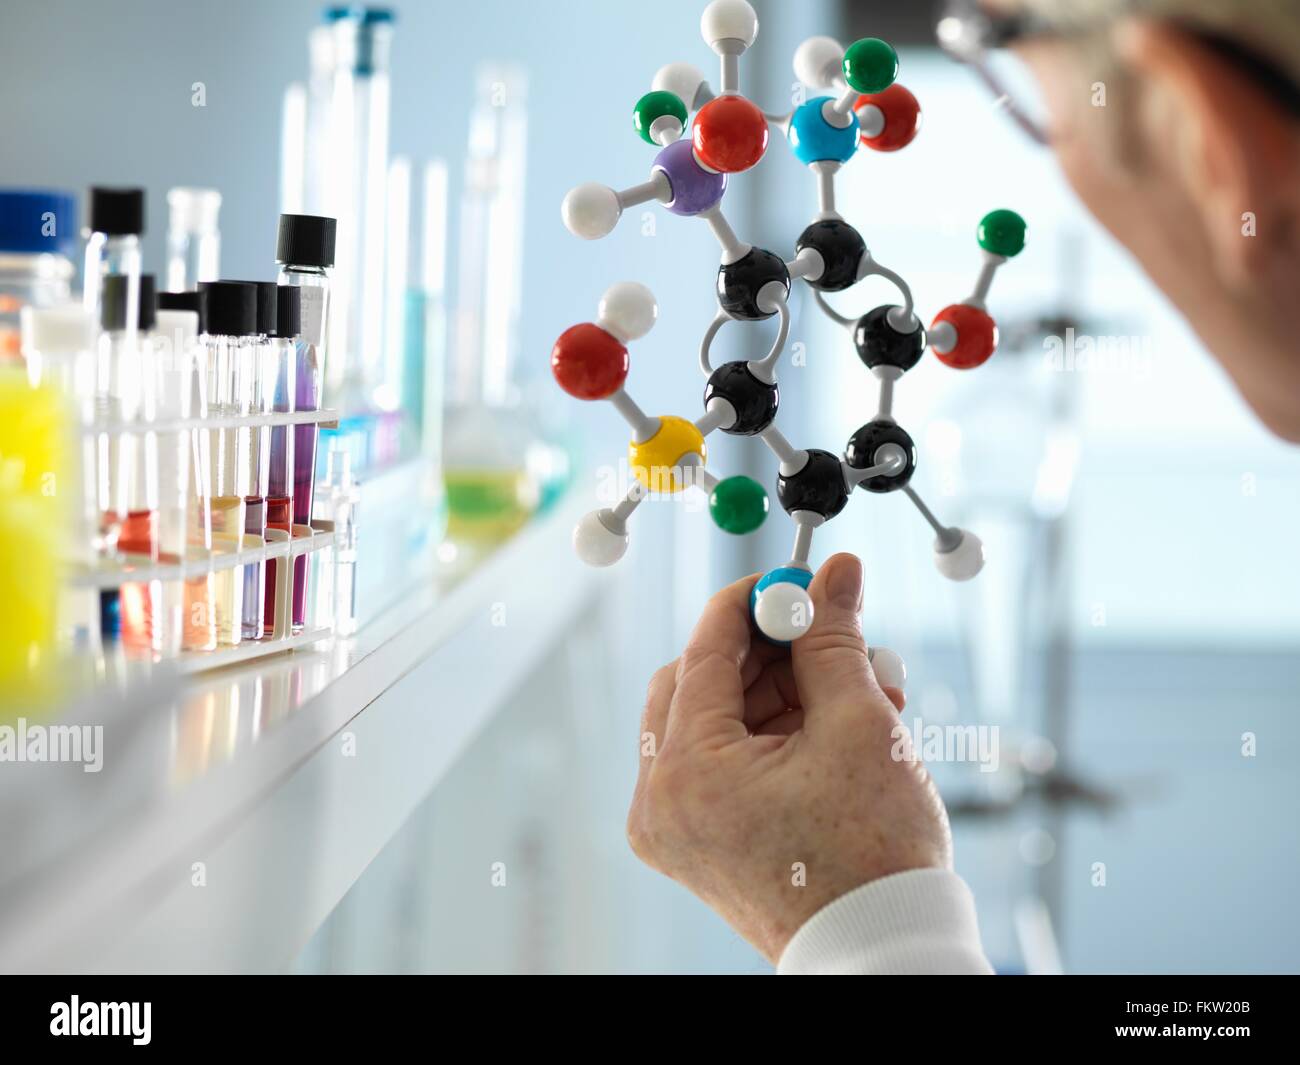 Scientist holding molecular model in laboratory Banque D'Images